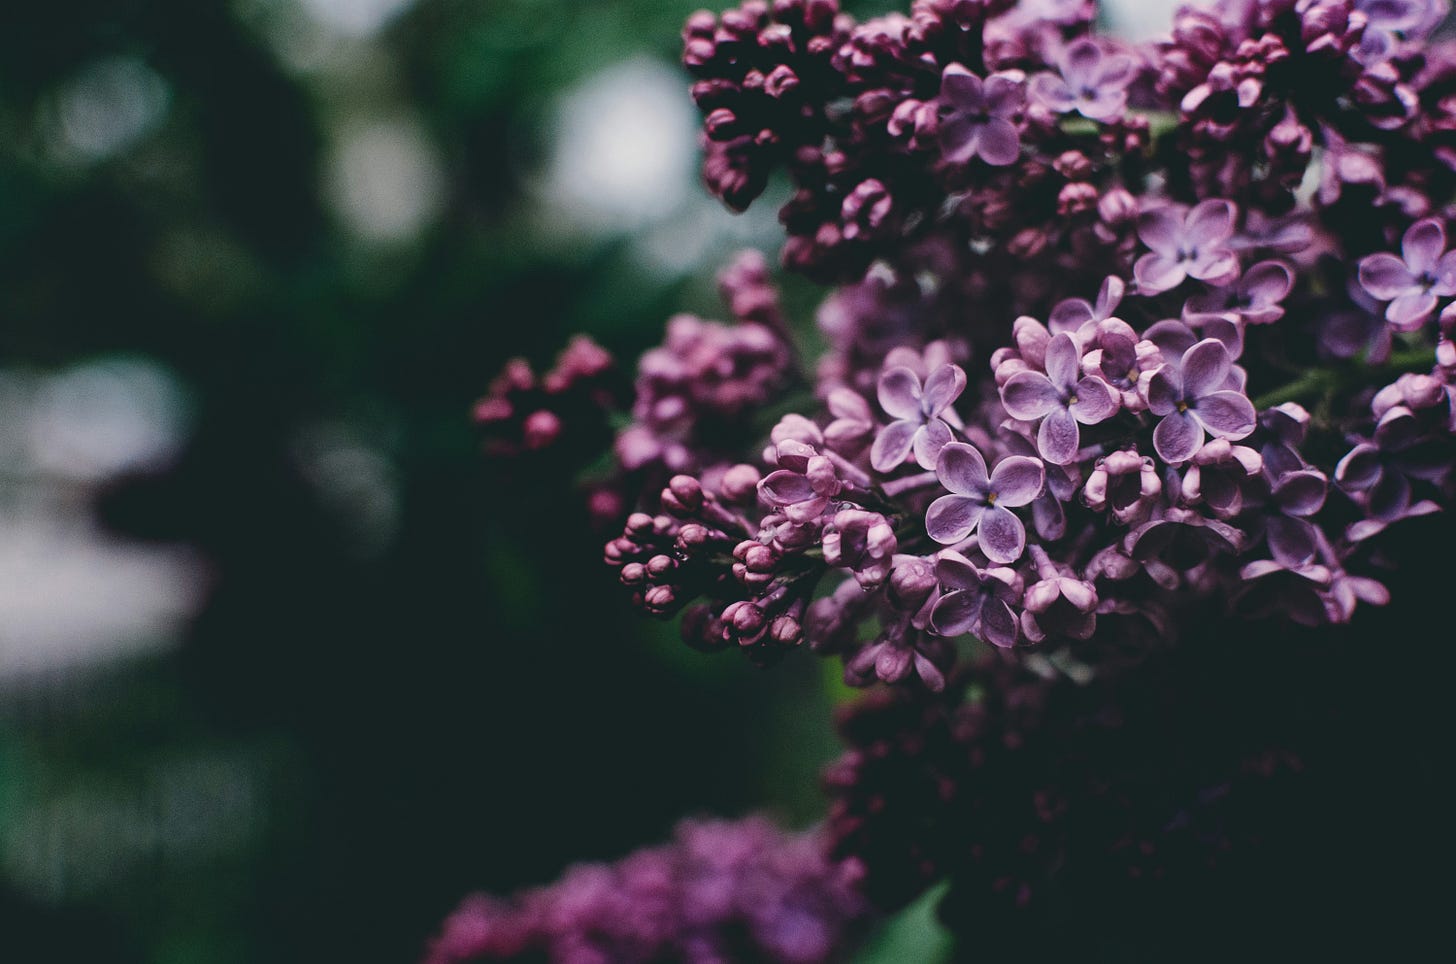 A photo of purple lilac blossoms against a background of dark green foliage.